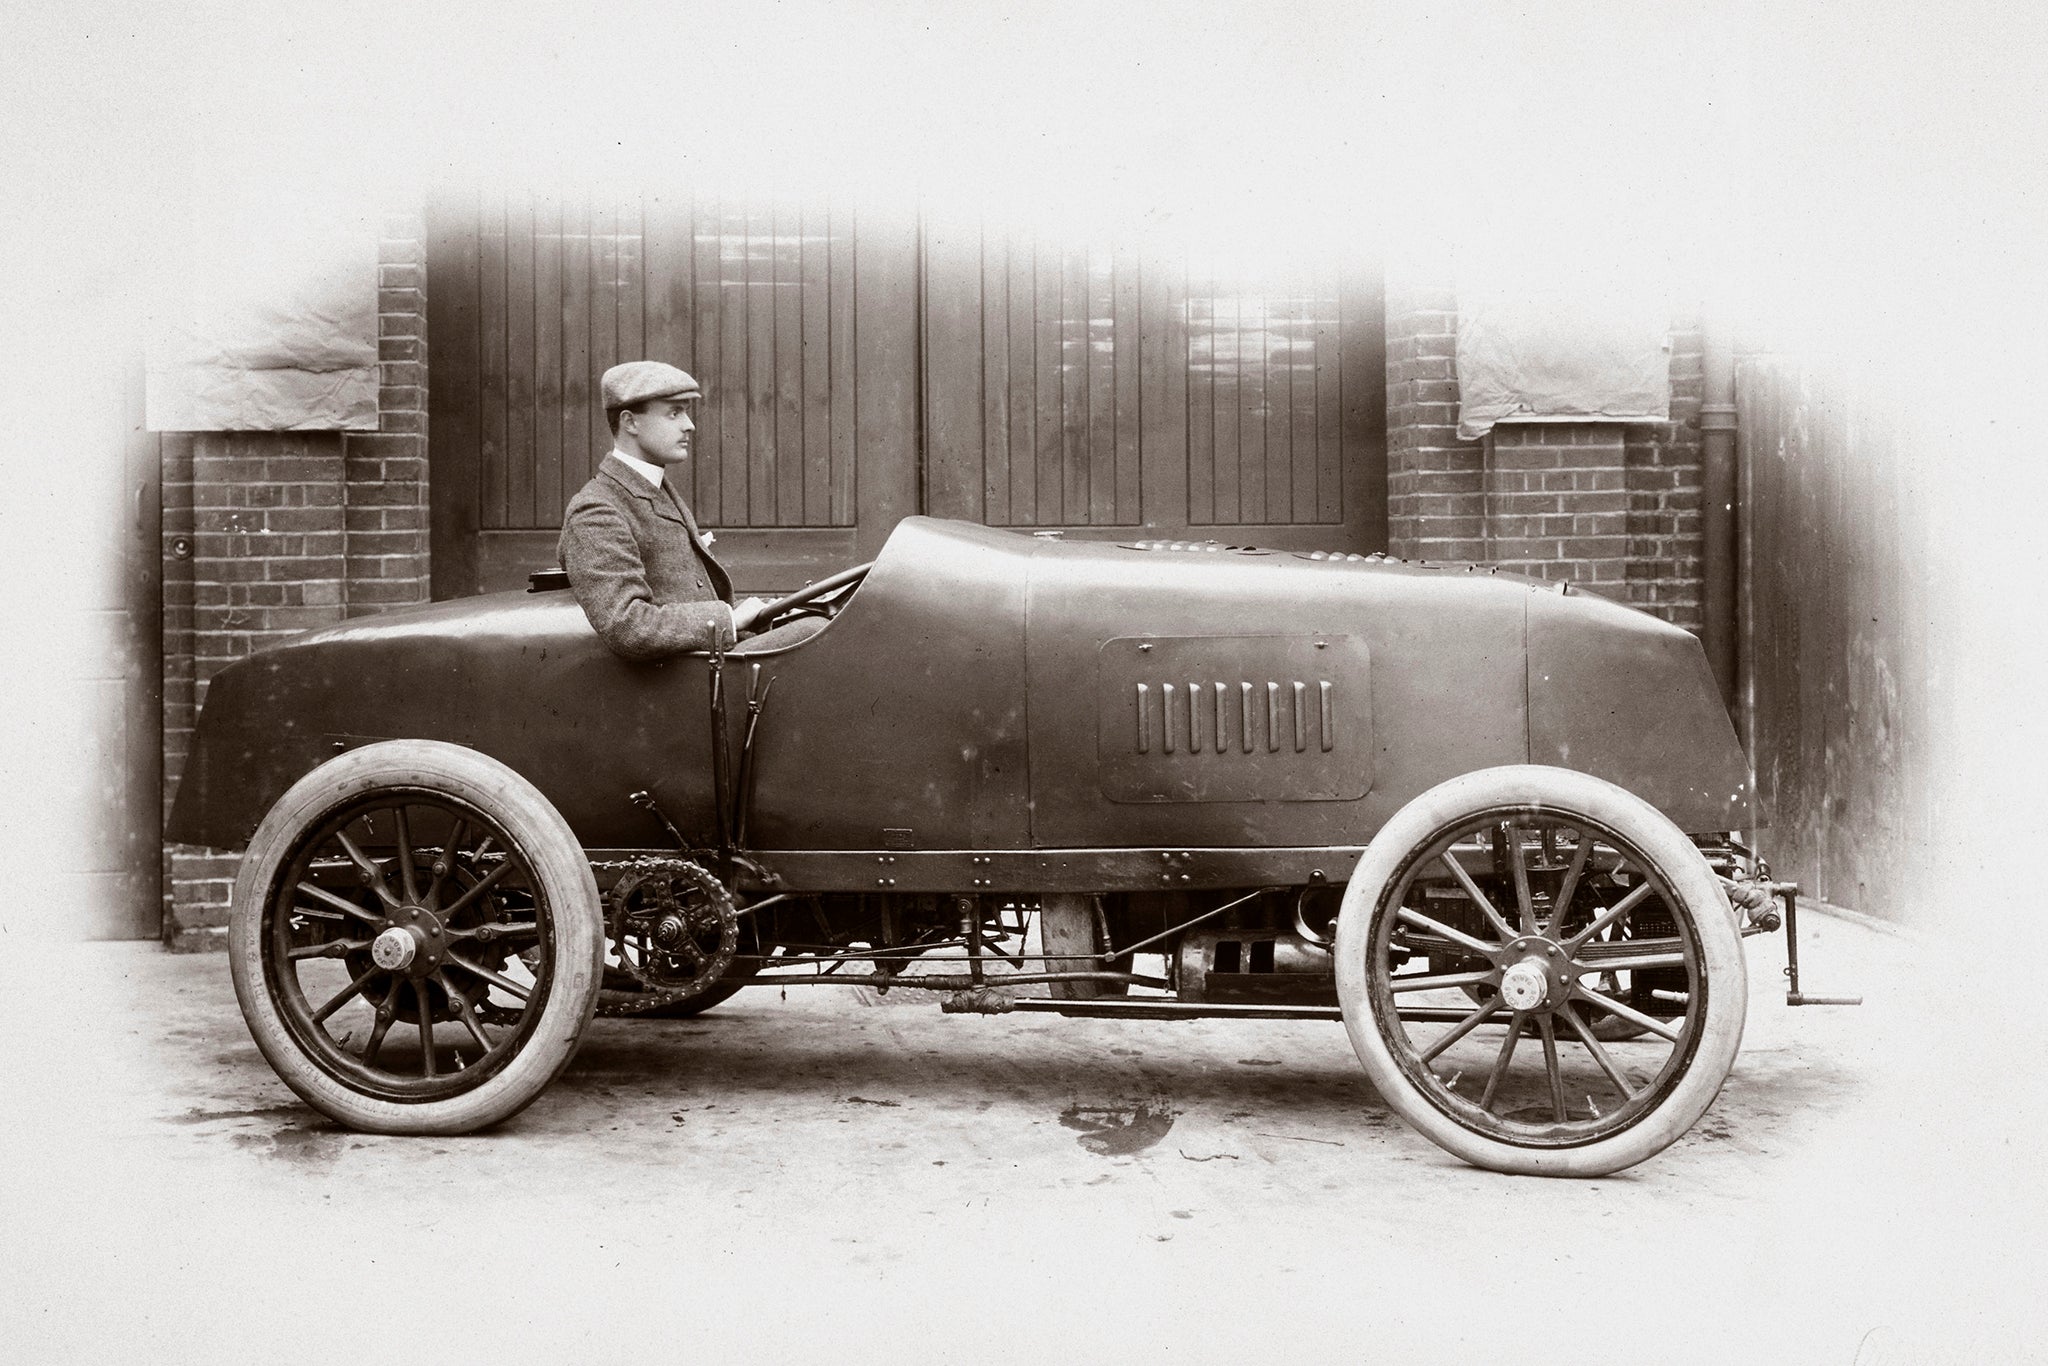 UNITED KINGDOM - OCTOBER 11:  Photograph taken from an album of images compiled by Charles Stewart Rolls (1877-1910), English motorist, motor car manufacturer and aviator. Frenchman Emile Mors was a firm believer in the benefits to his firm of being involved in motor racing, and his cars were at the forefront of early motorsport, pioneering innovations such as the V configuration of cylinders and shock absorbers. Rolls was a keen driver and was well known in the car world after taking part in many early motor races. Driving an 80 hp Mors Racer, he set a new world kilometre speed record of 150 km/h (93 mph) in Phoenix Park, Dublin, in 1903. He founded Rolls-Royce Ltd with Sir Frederick Henry Royce (1863-1933) in 1906, creating one of the world's most famous marques.  (Photo by SSPL/Getty Images)